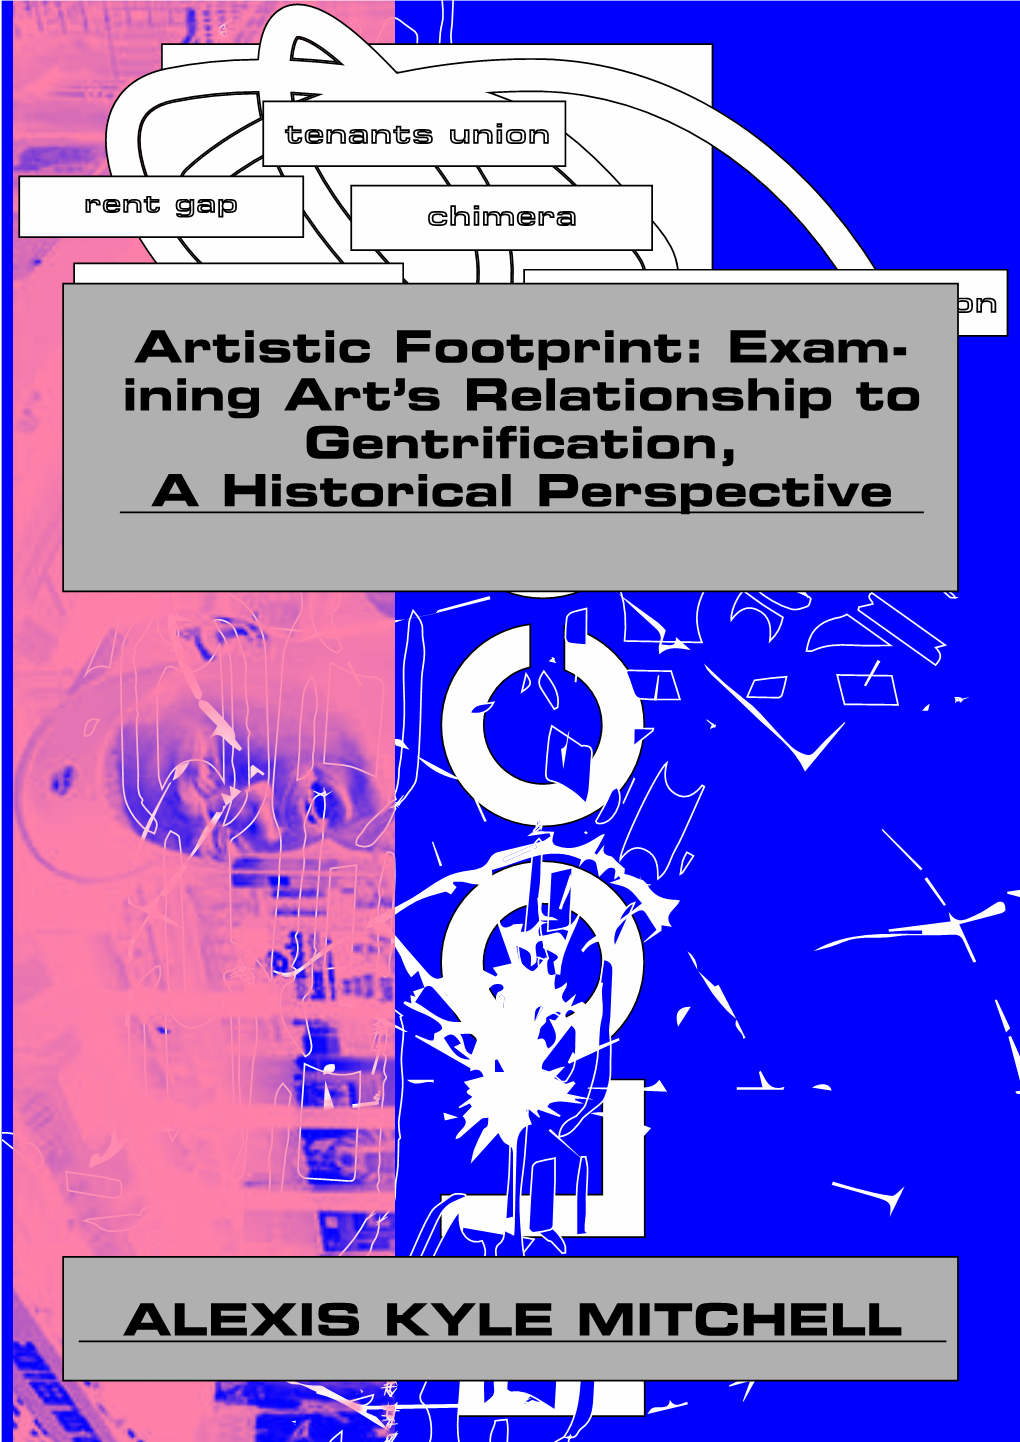 1 Artistic Footprint: Exam- Ining Art's Relationship to Gentrification, a Historical Perspective ALEXIS KYLE MITCHELL